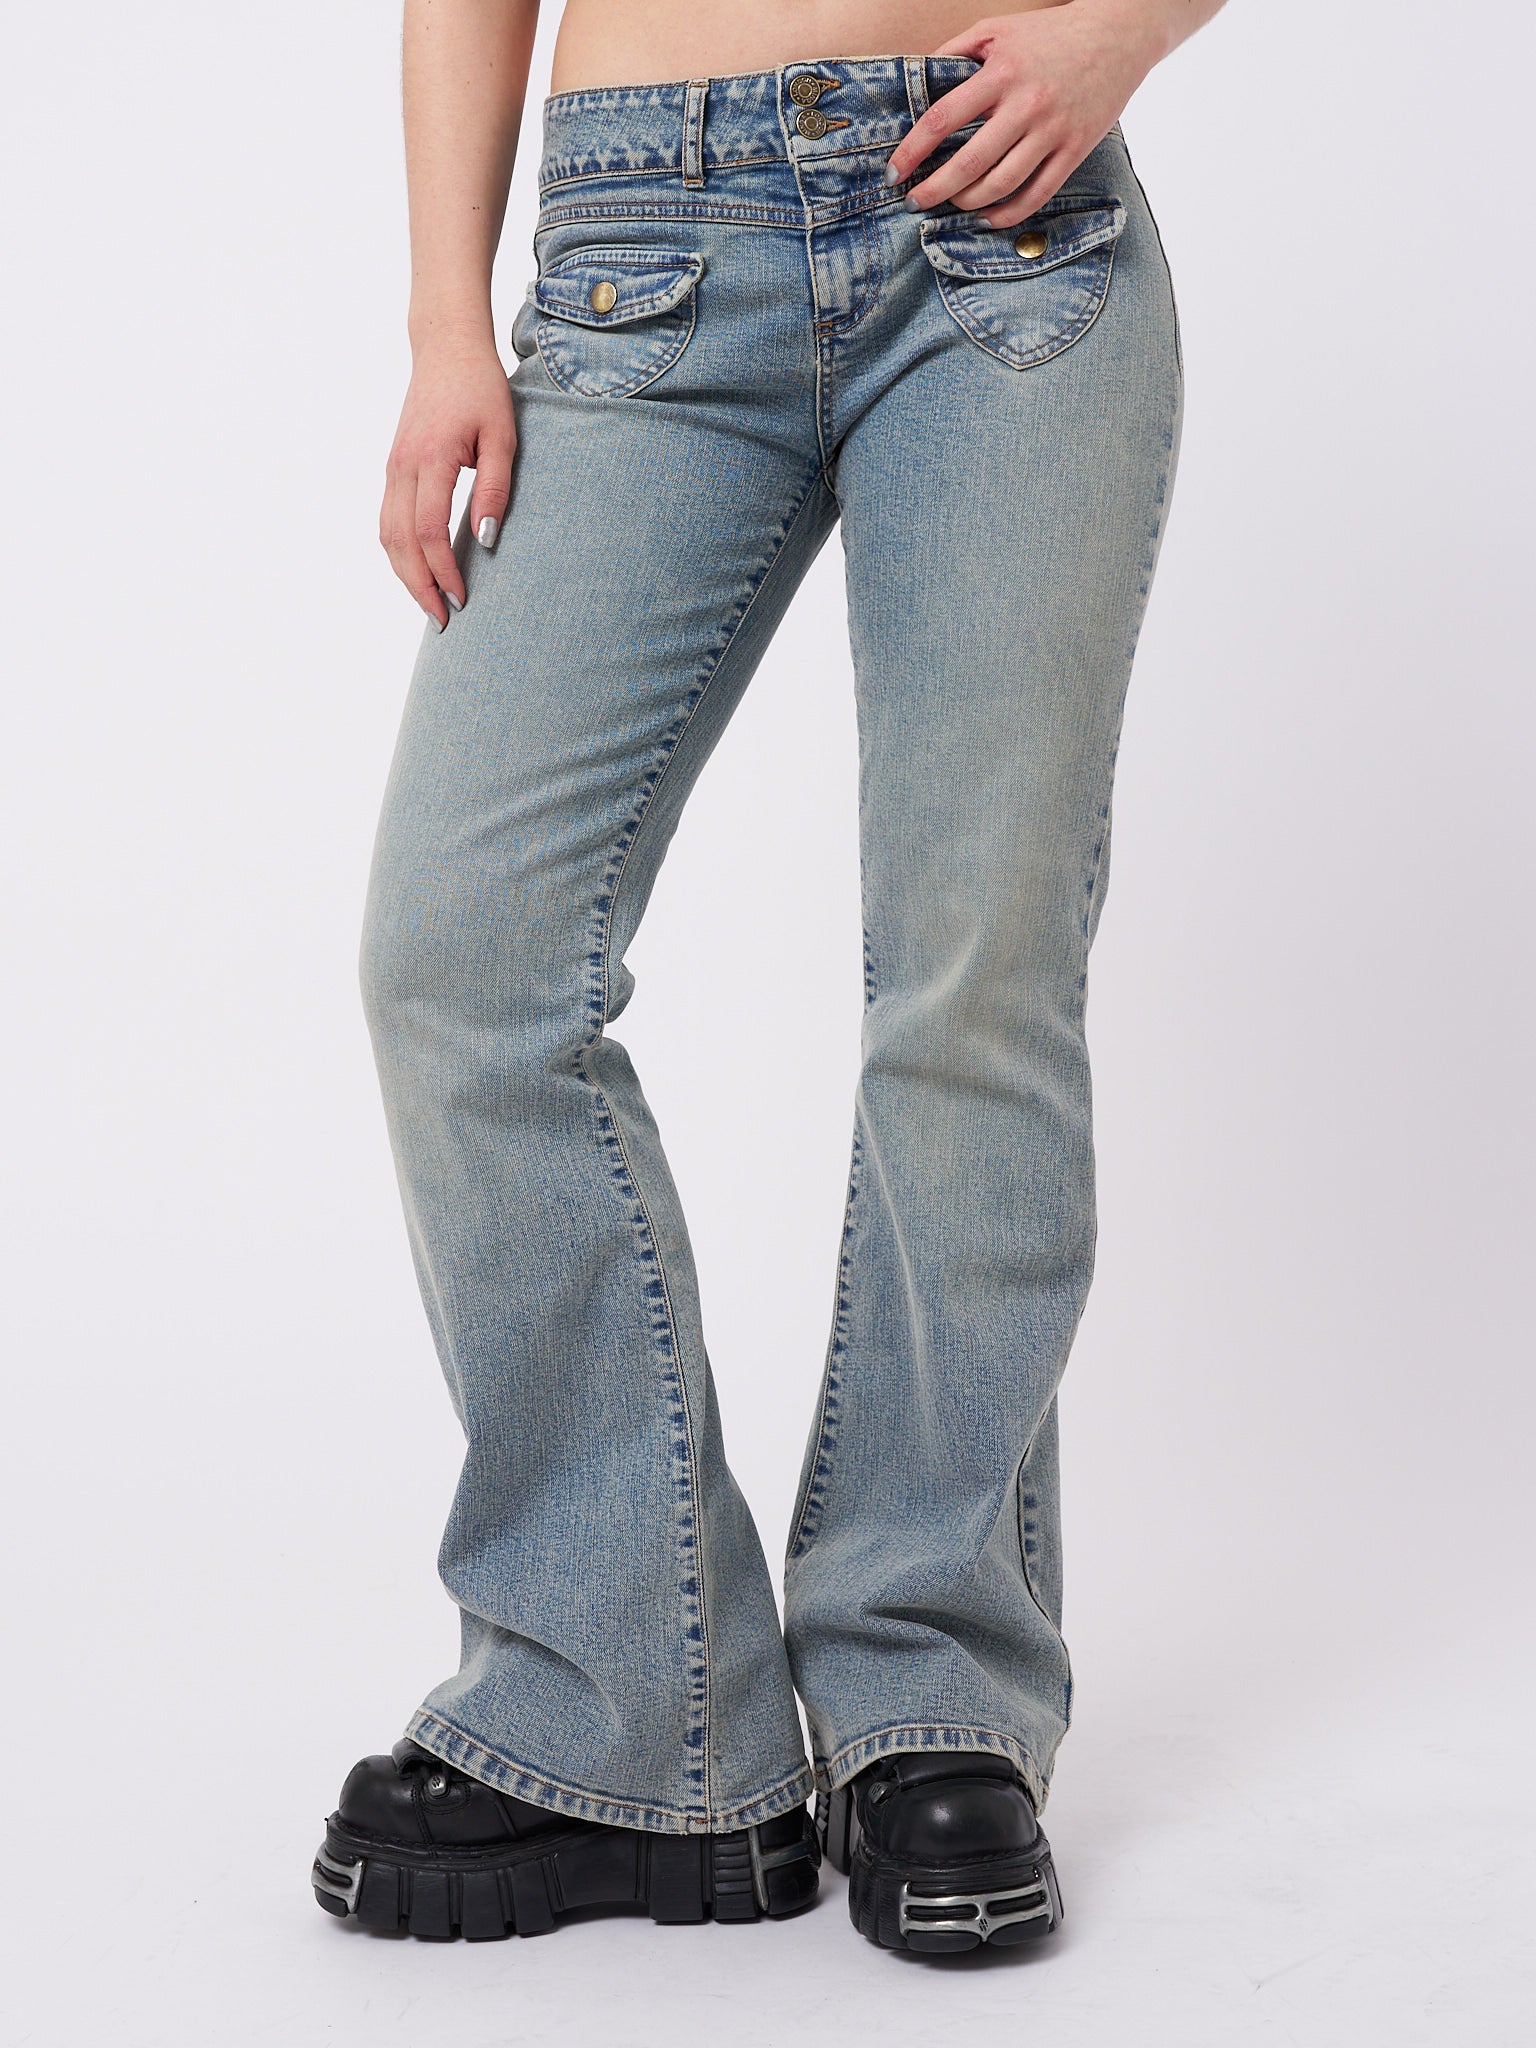 Over-dyed flare jeans with front pockets by Minga London. Trendy and flattering fit for a fashionable and retro-inspired look.